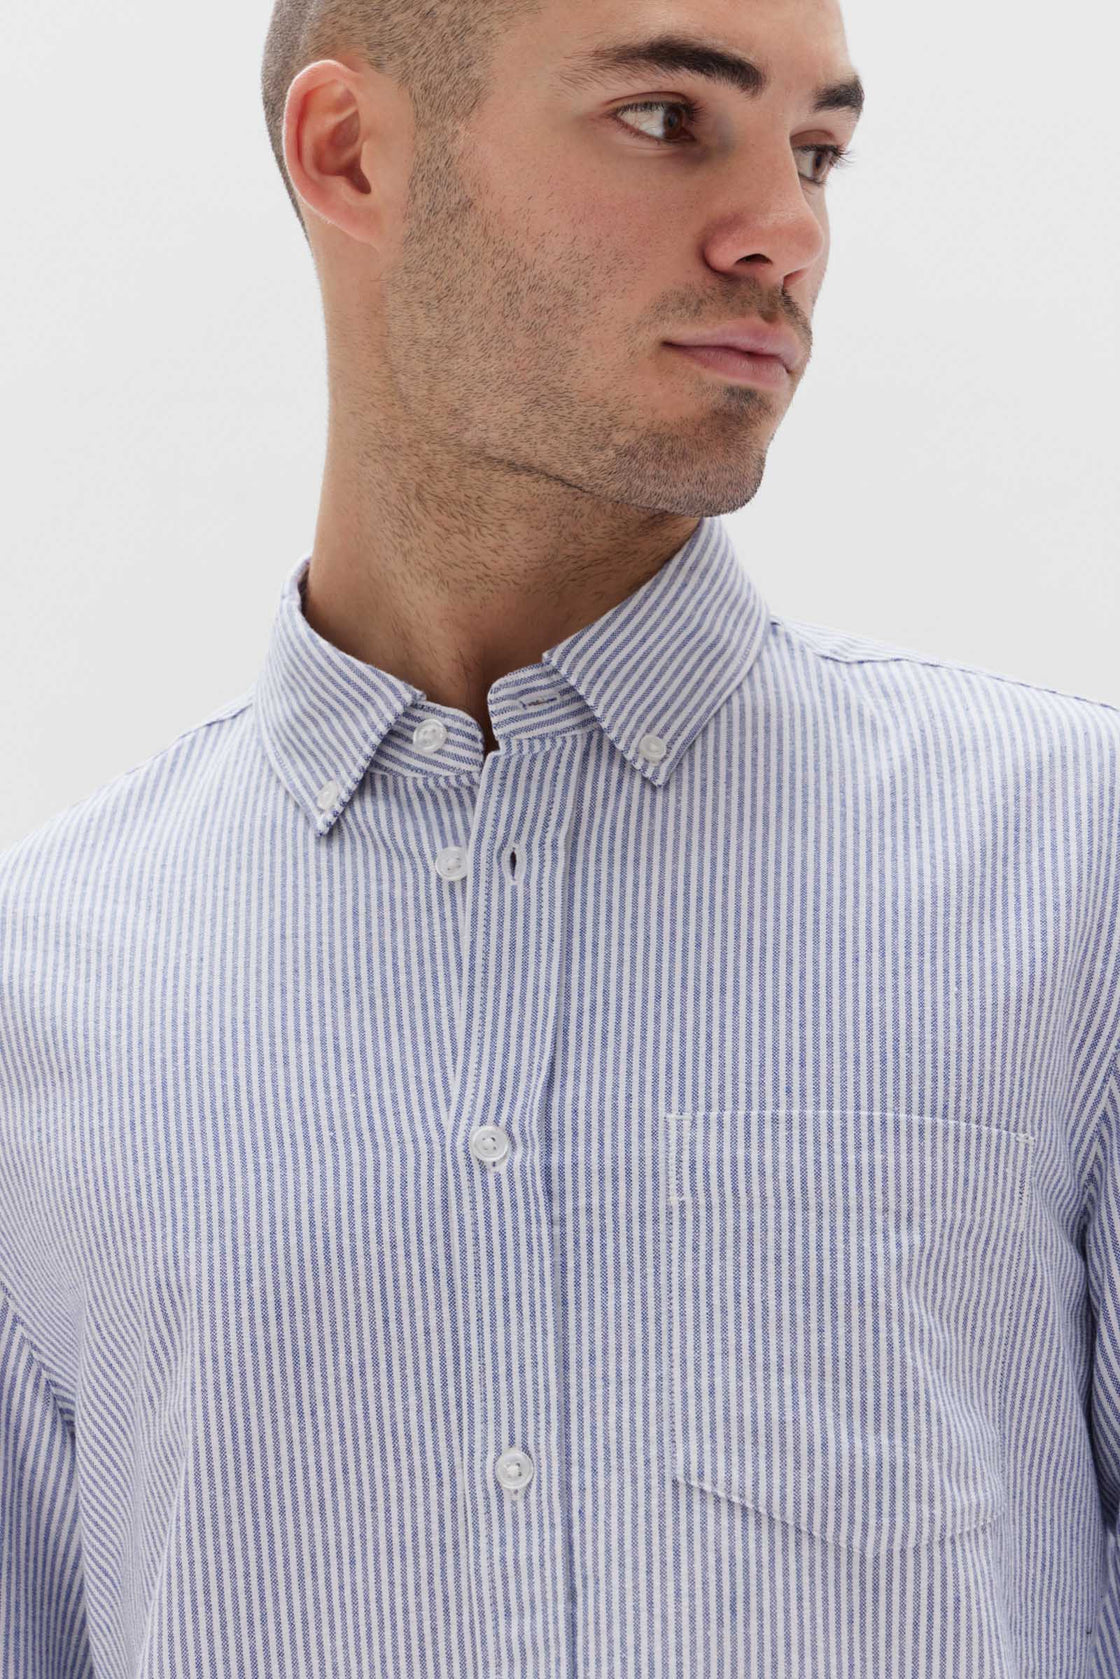 Assembly Label | New Oxford Shirt - Mid Blue Stripe